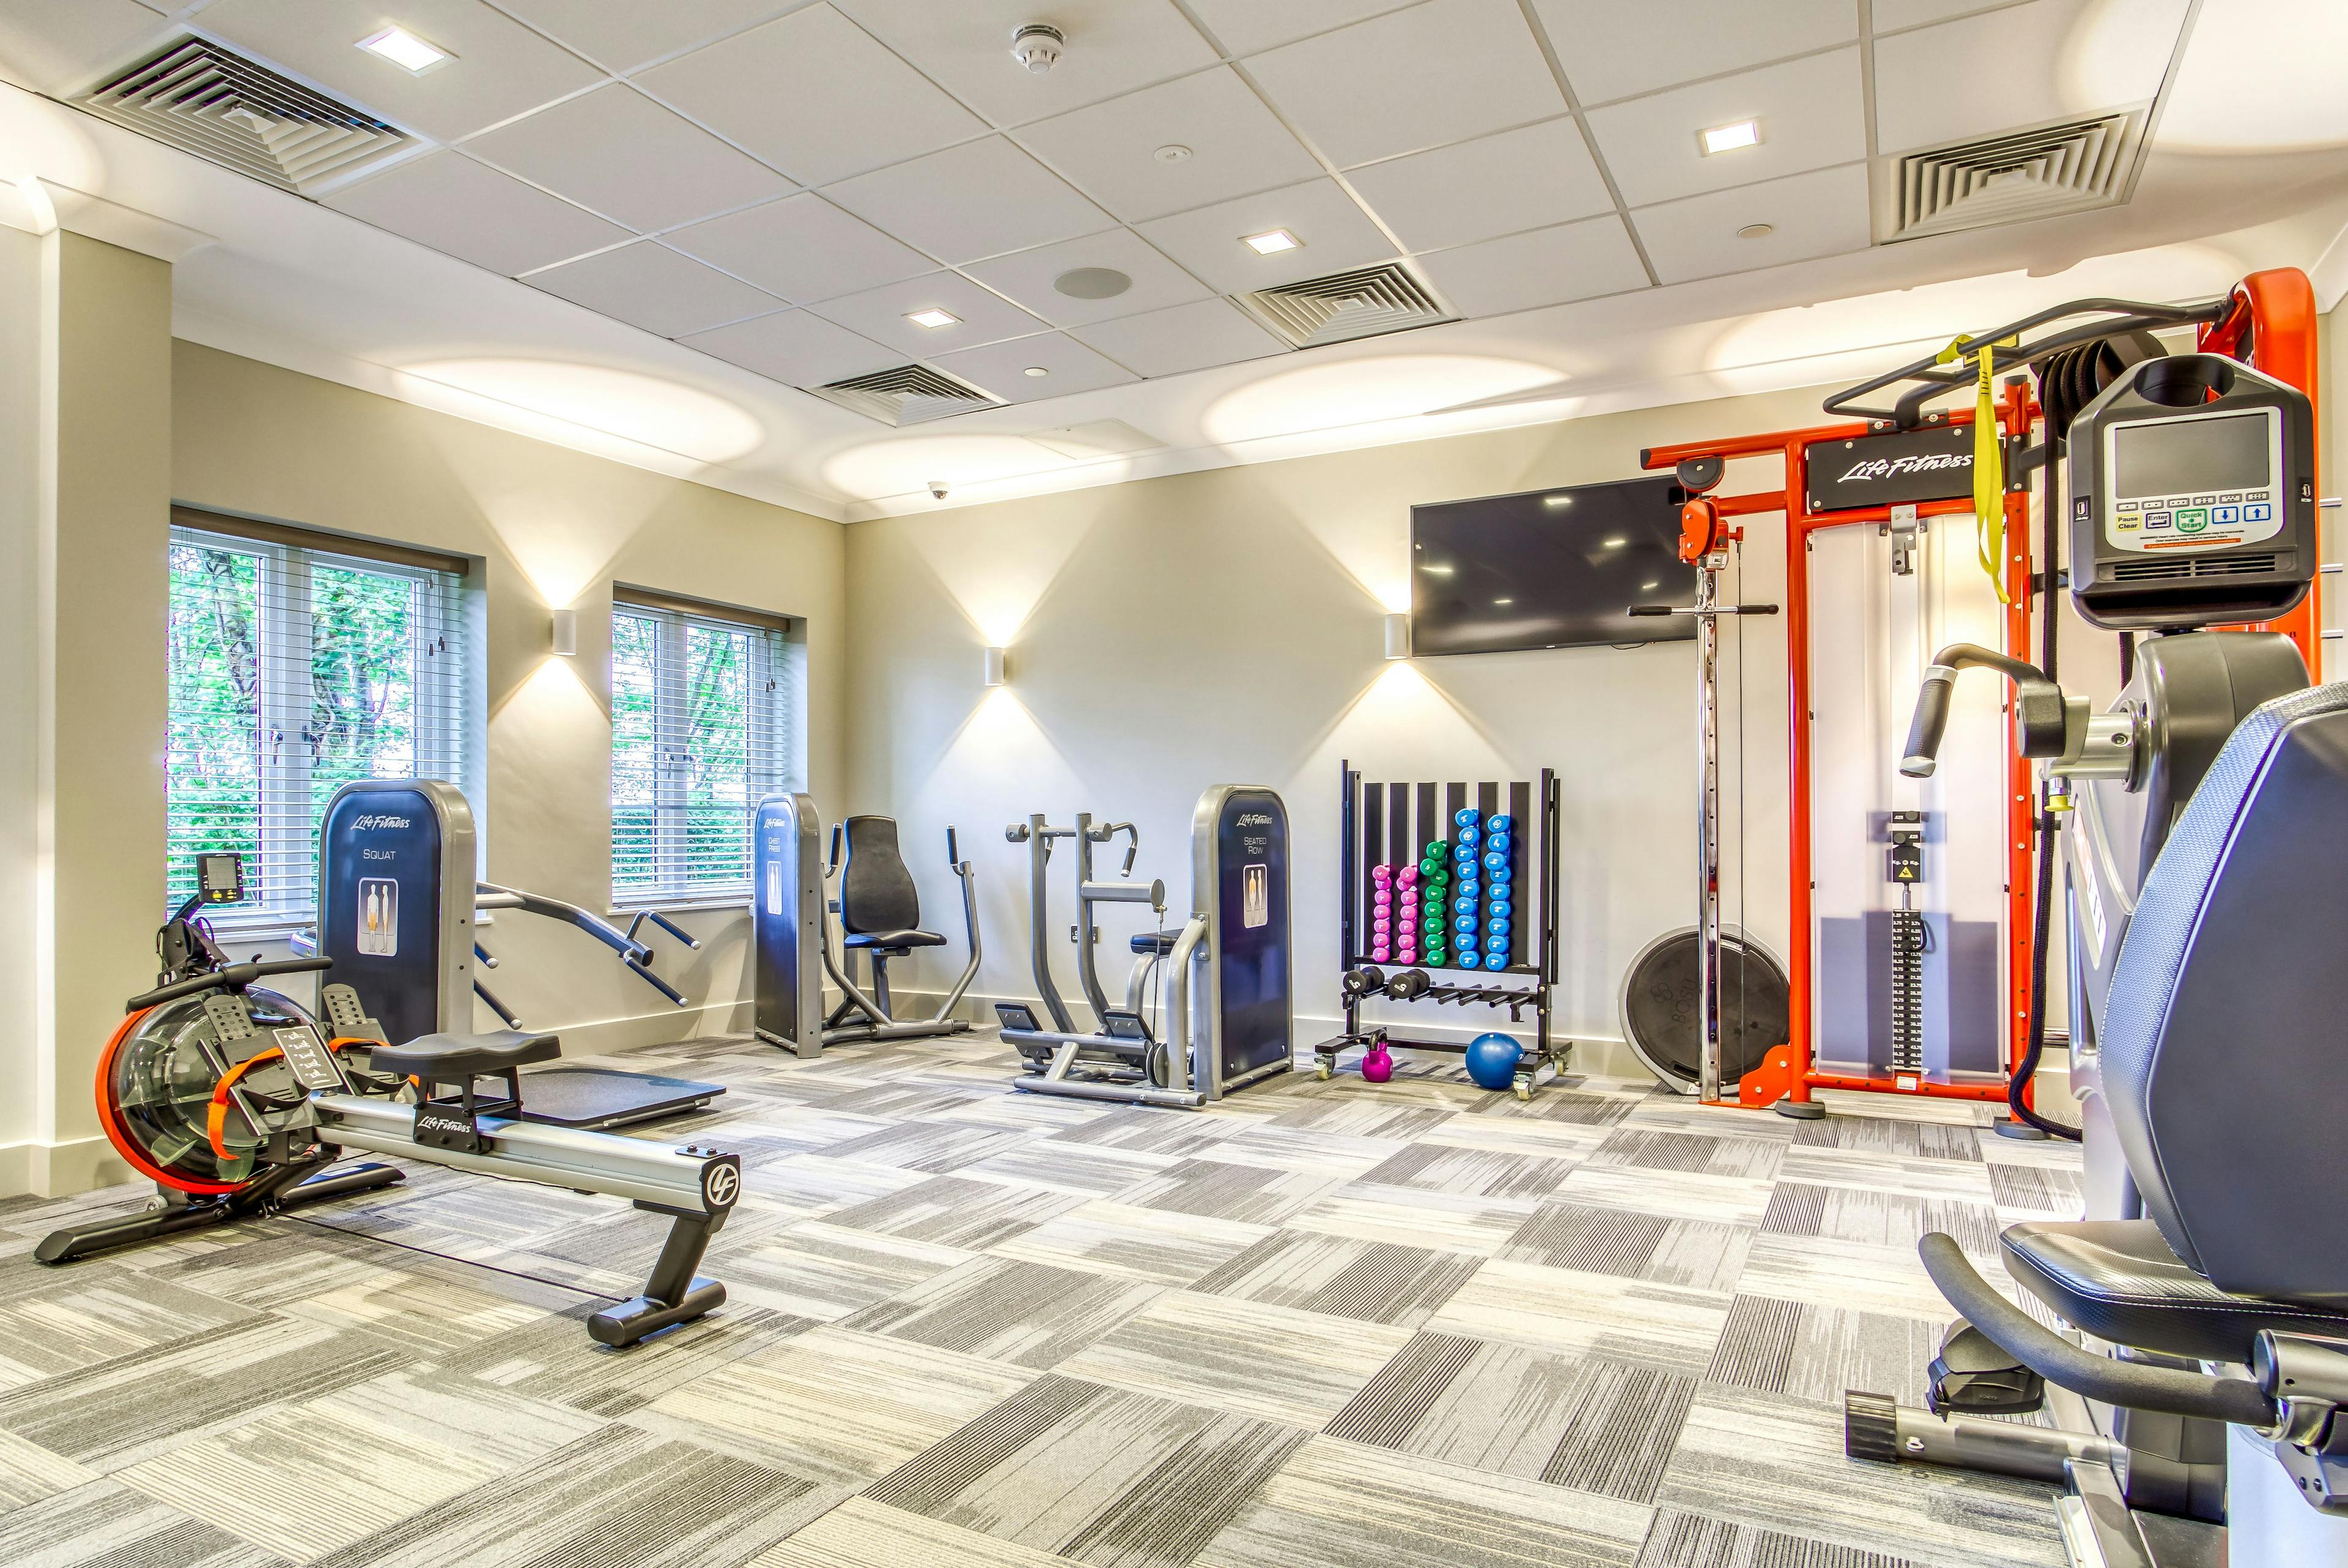 Gym of Wood Norton care home in Evesham, Worcestershire